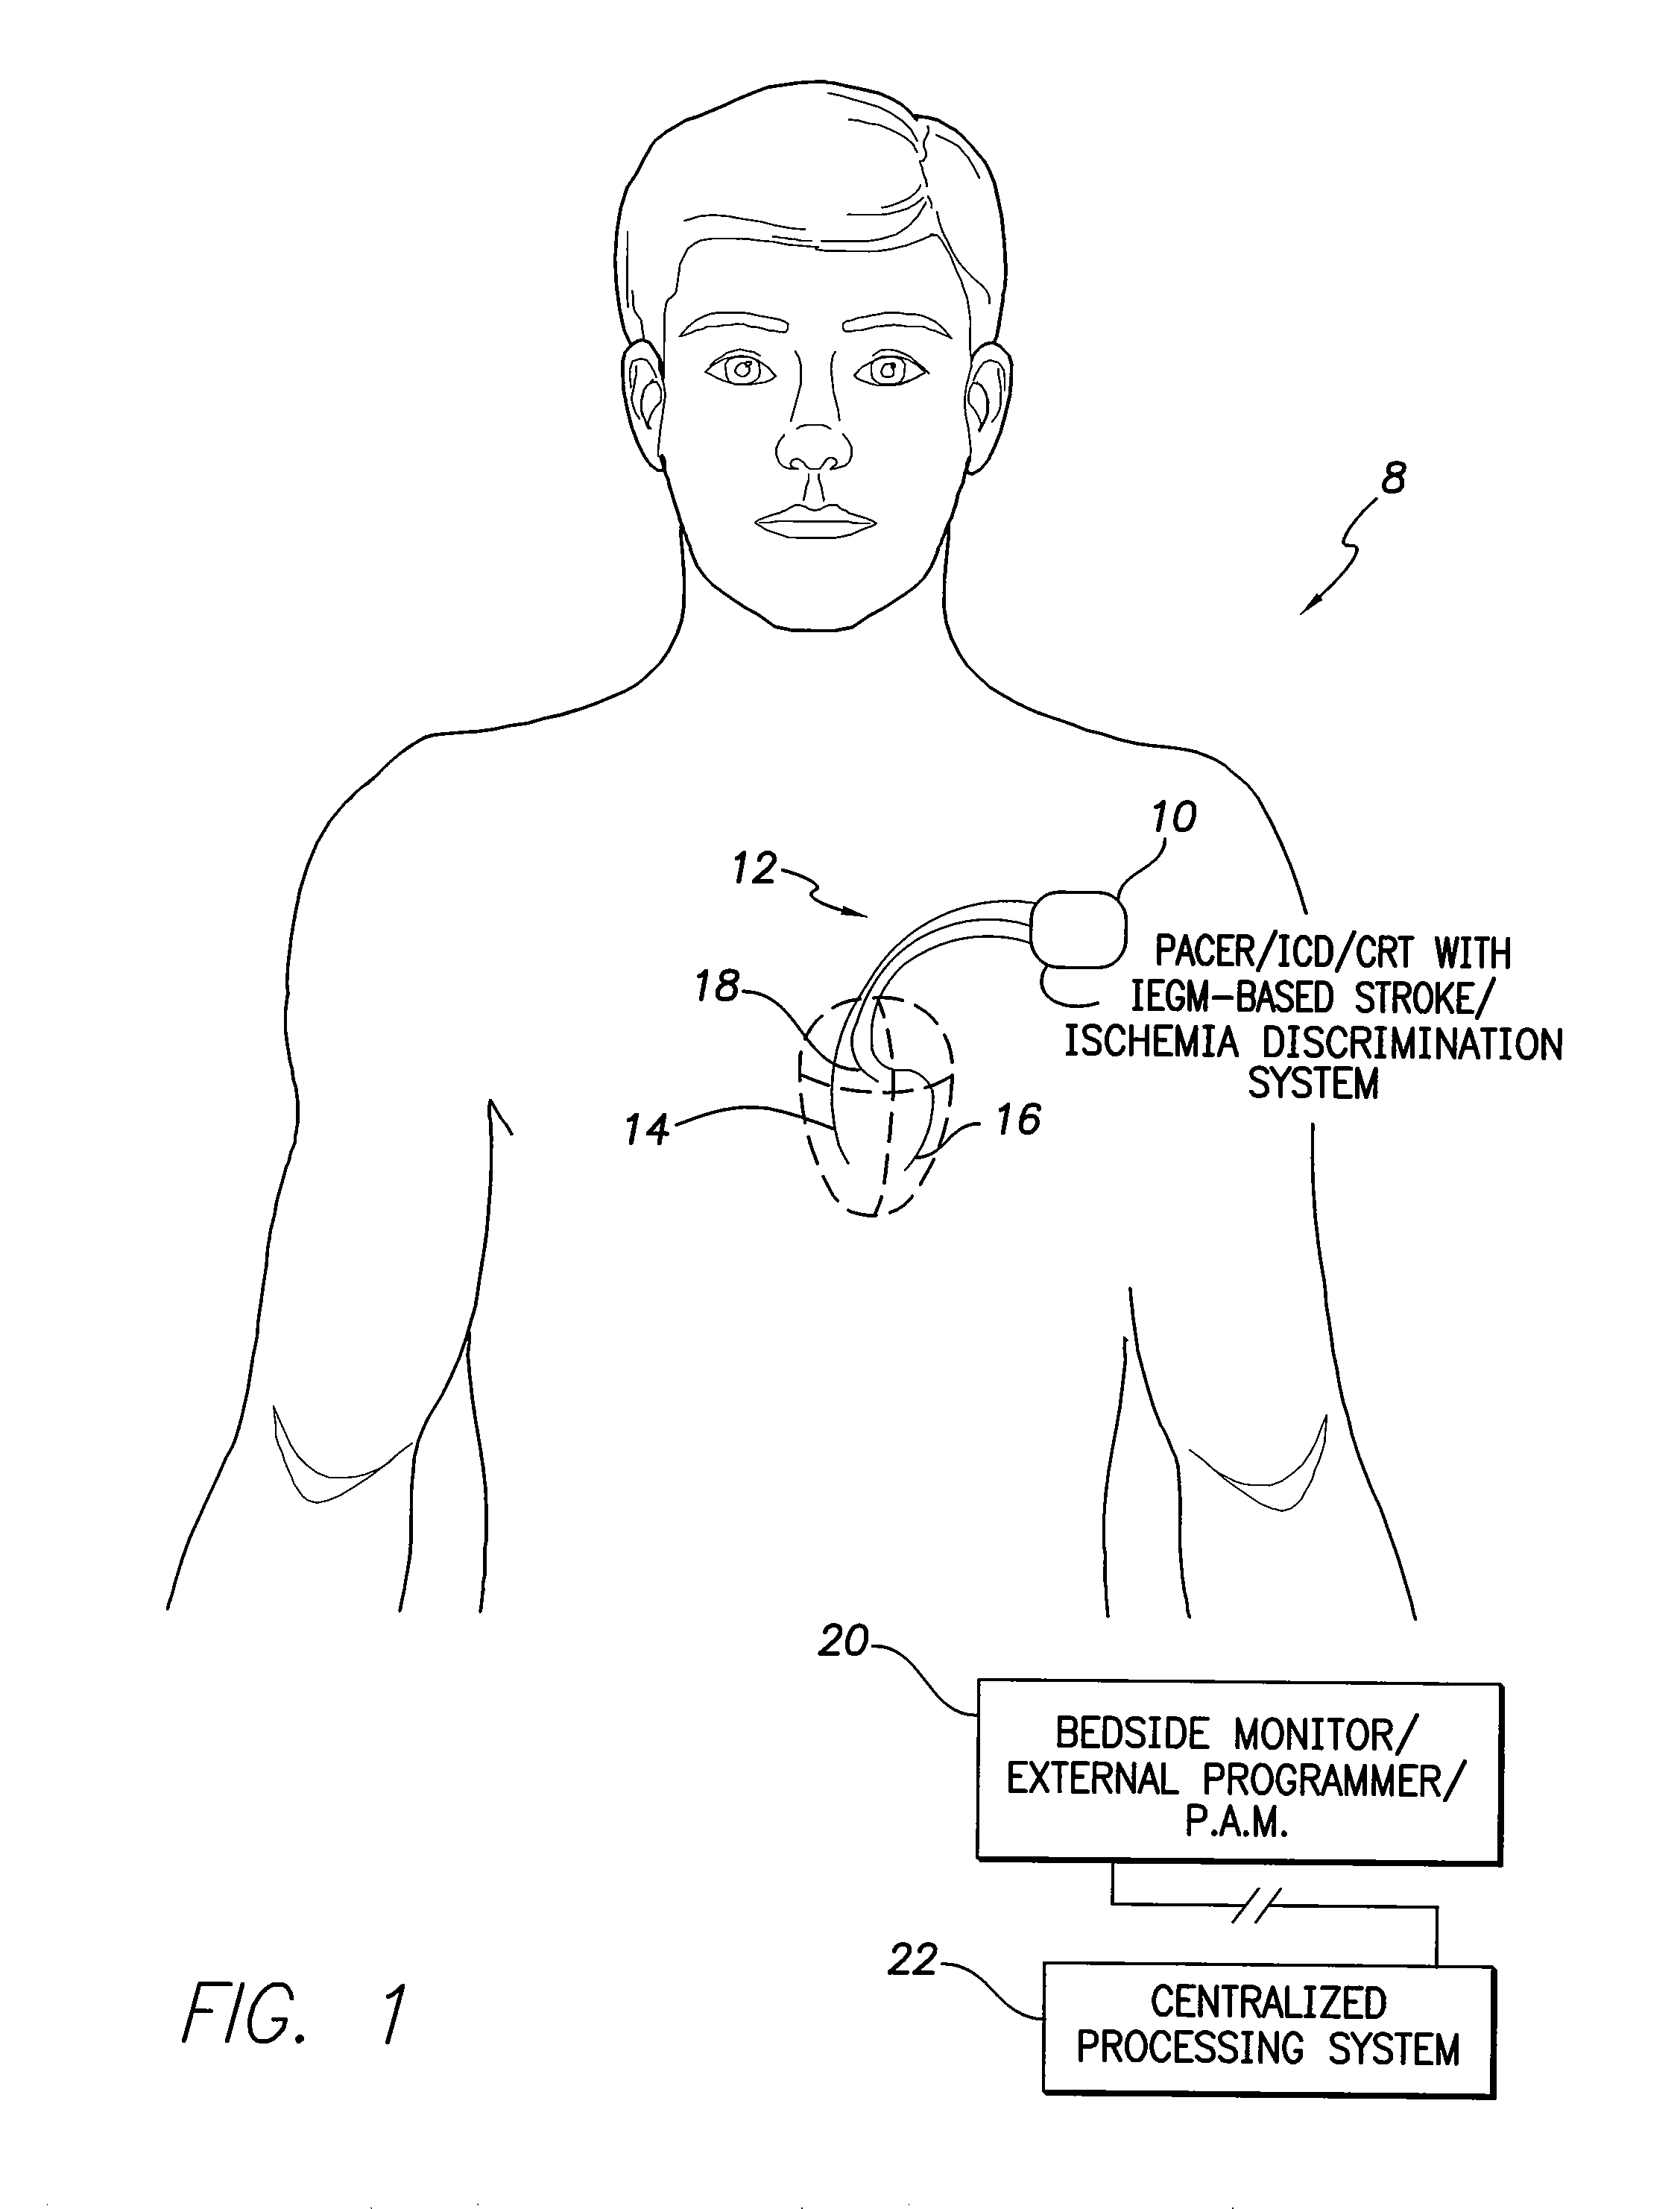 Systems and methods for use by implantable medical devices for detecting and discriminating stroke and cardiac ischemia using electrocardiac signals